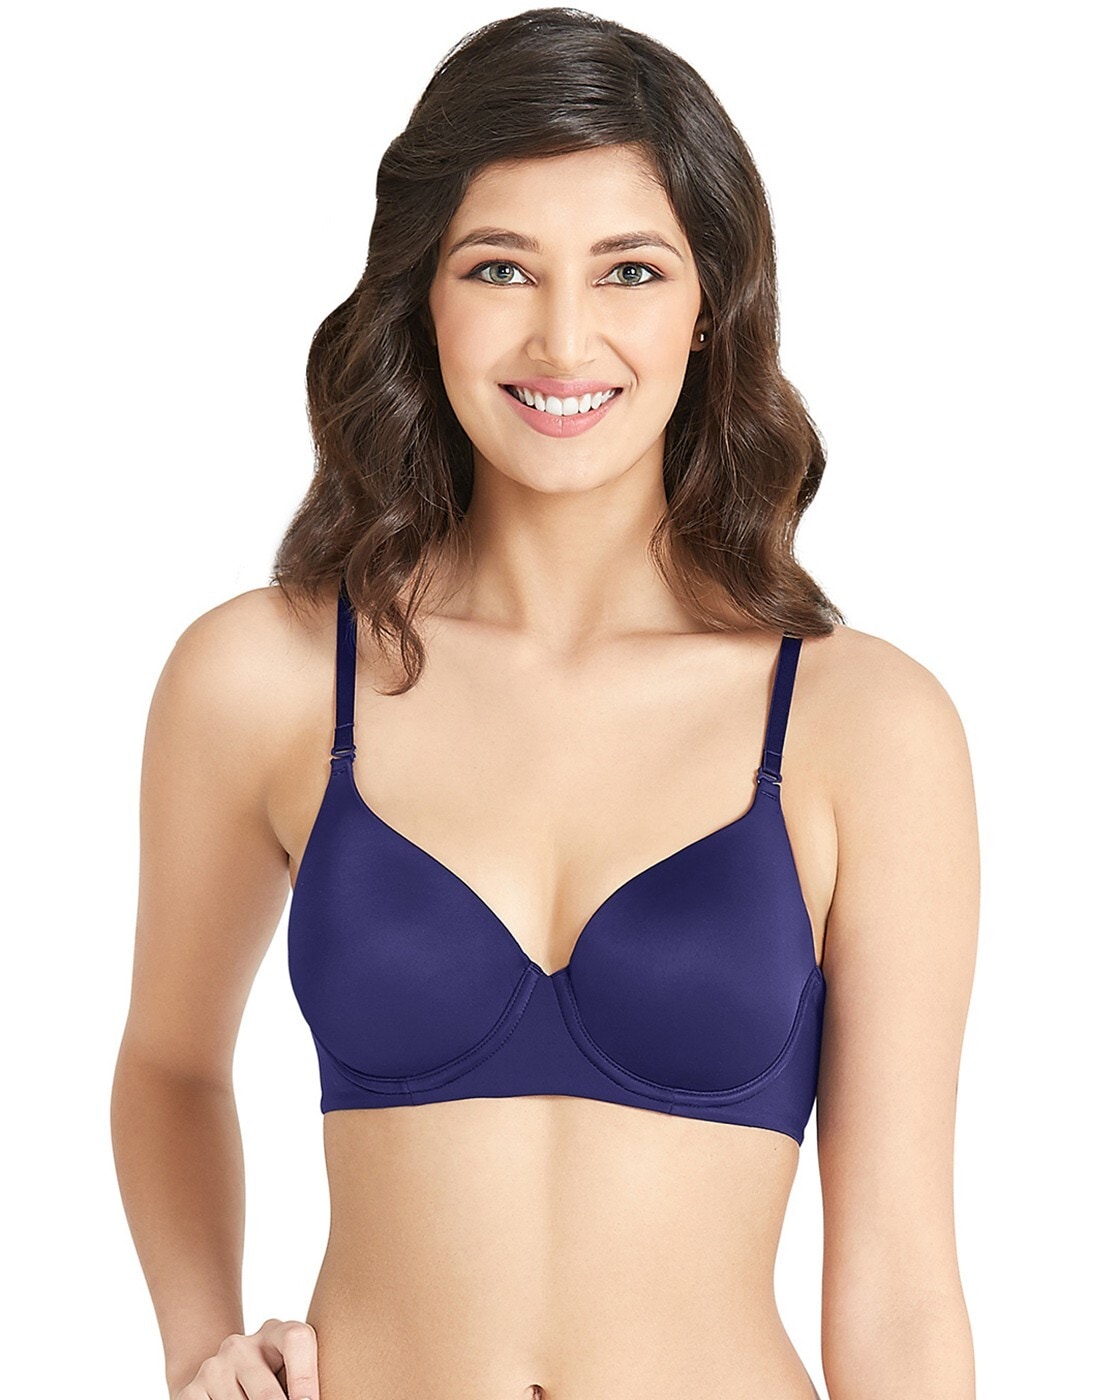 Buy Textured Wired Demi Bra with Hook and Eye Closure